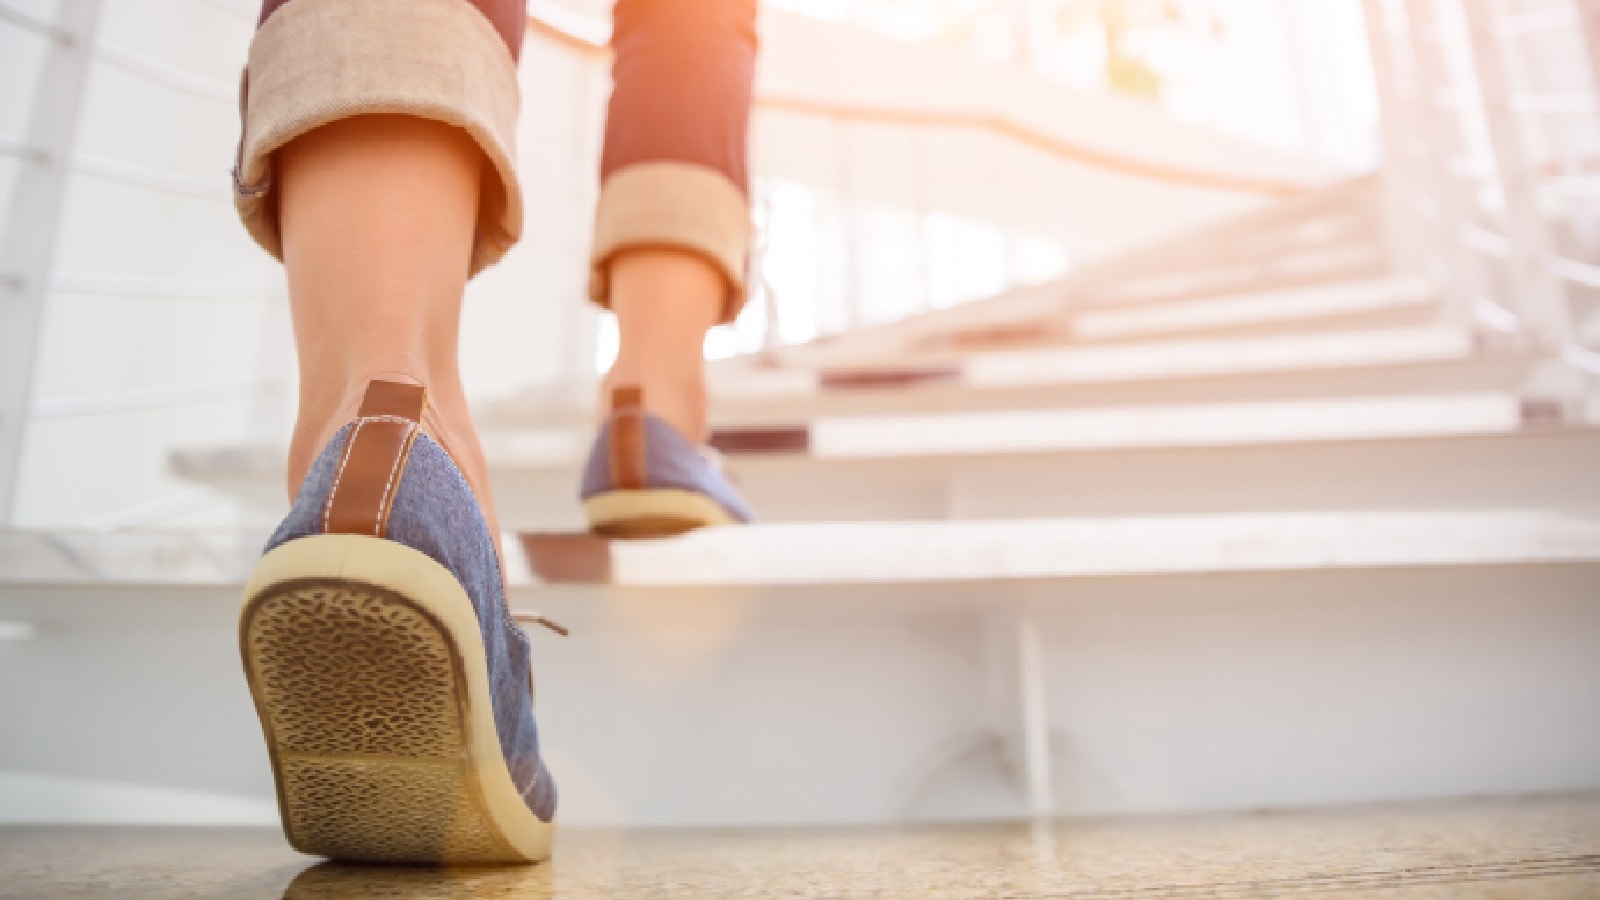 Climbing over five flights of stairs may boost heart health: Study